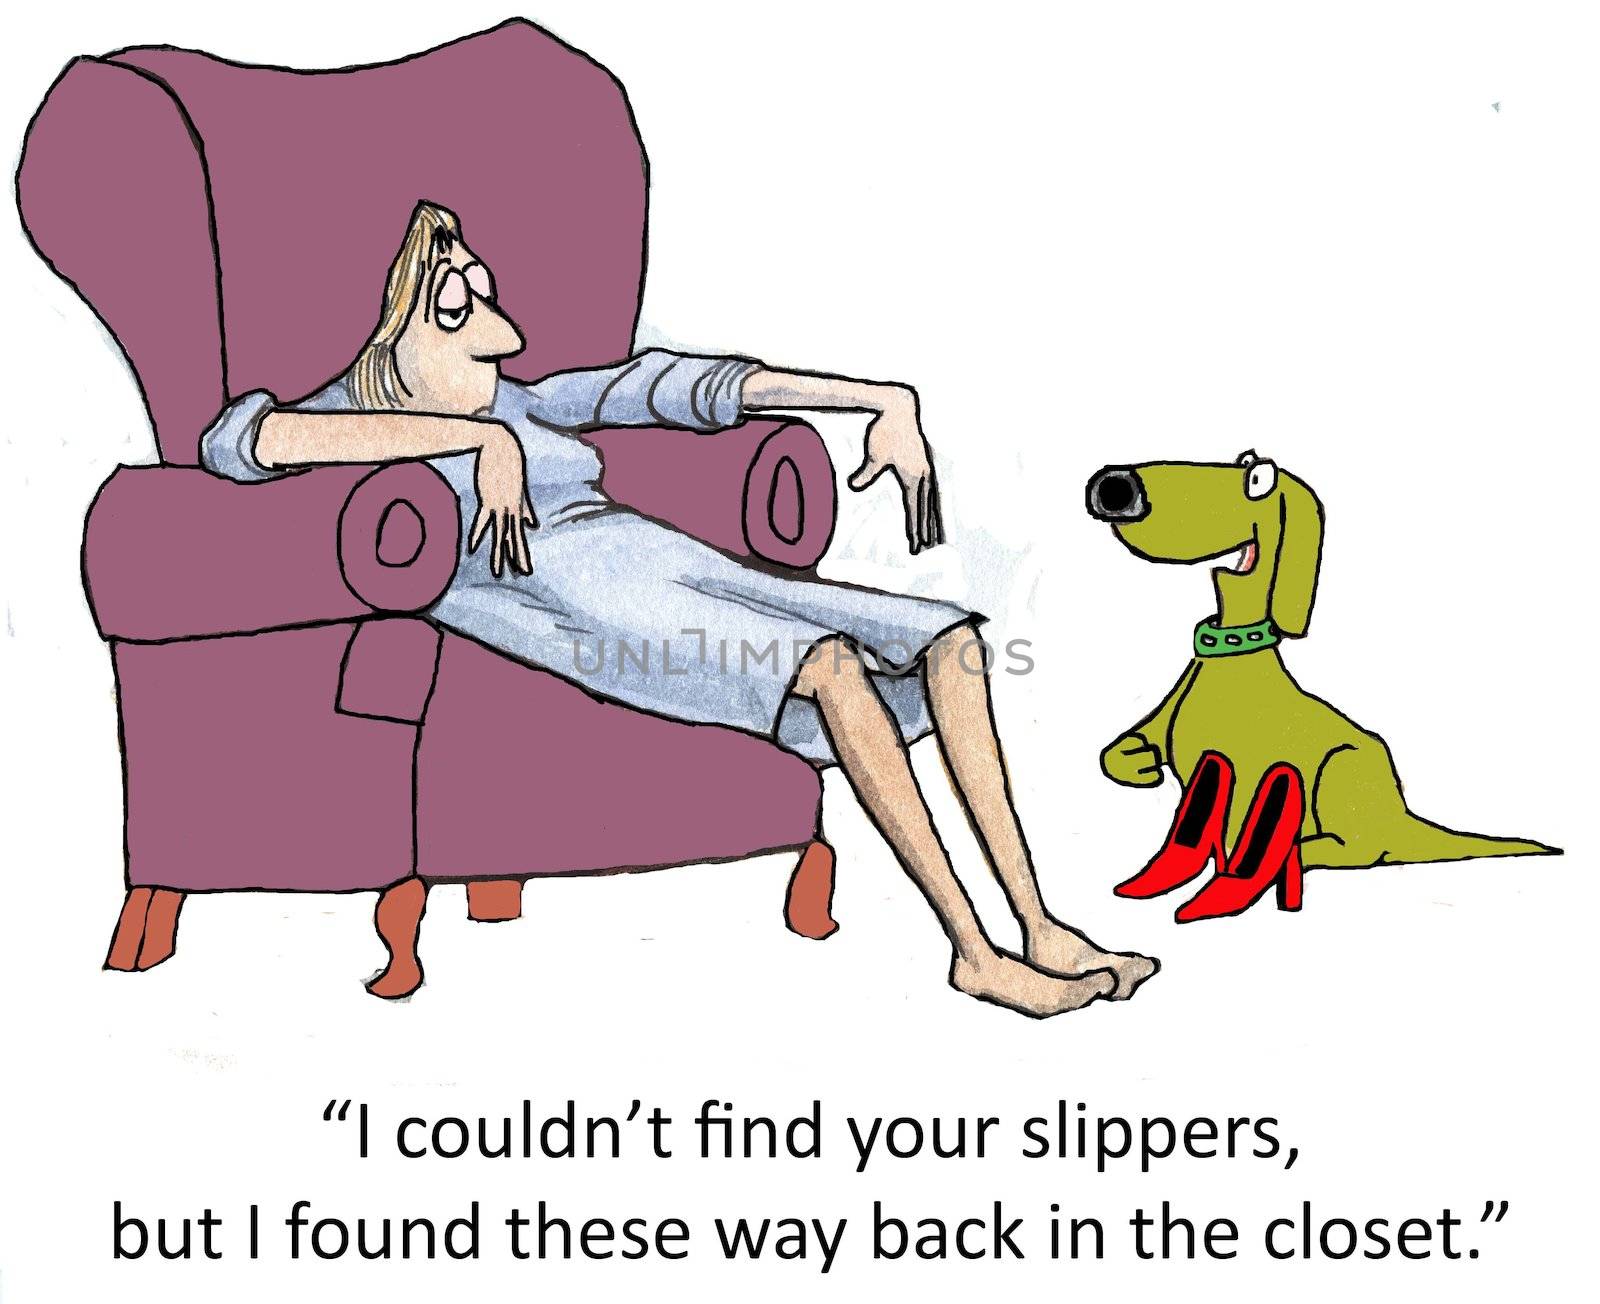 "I couldn't find your slippers, but I found these way back in the closet."